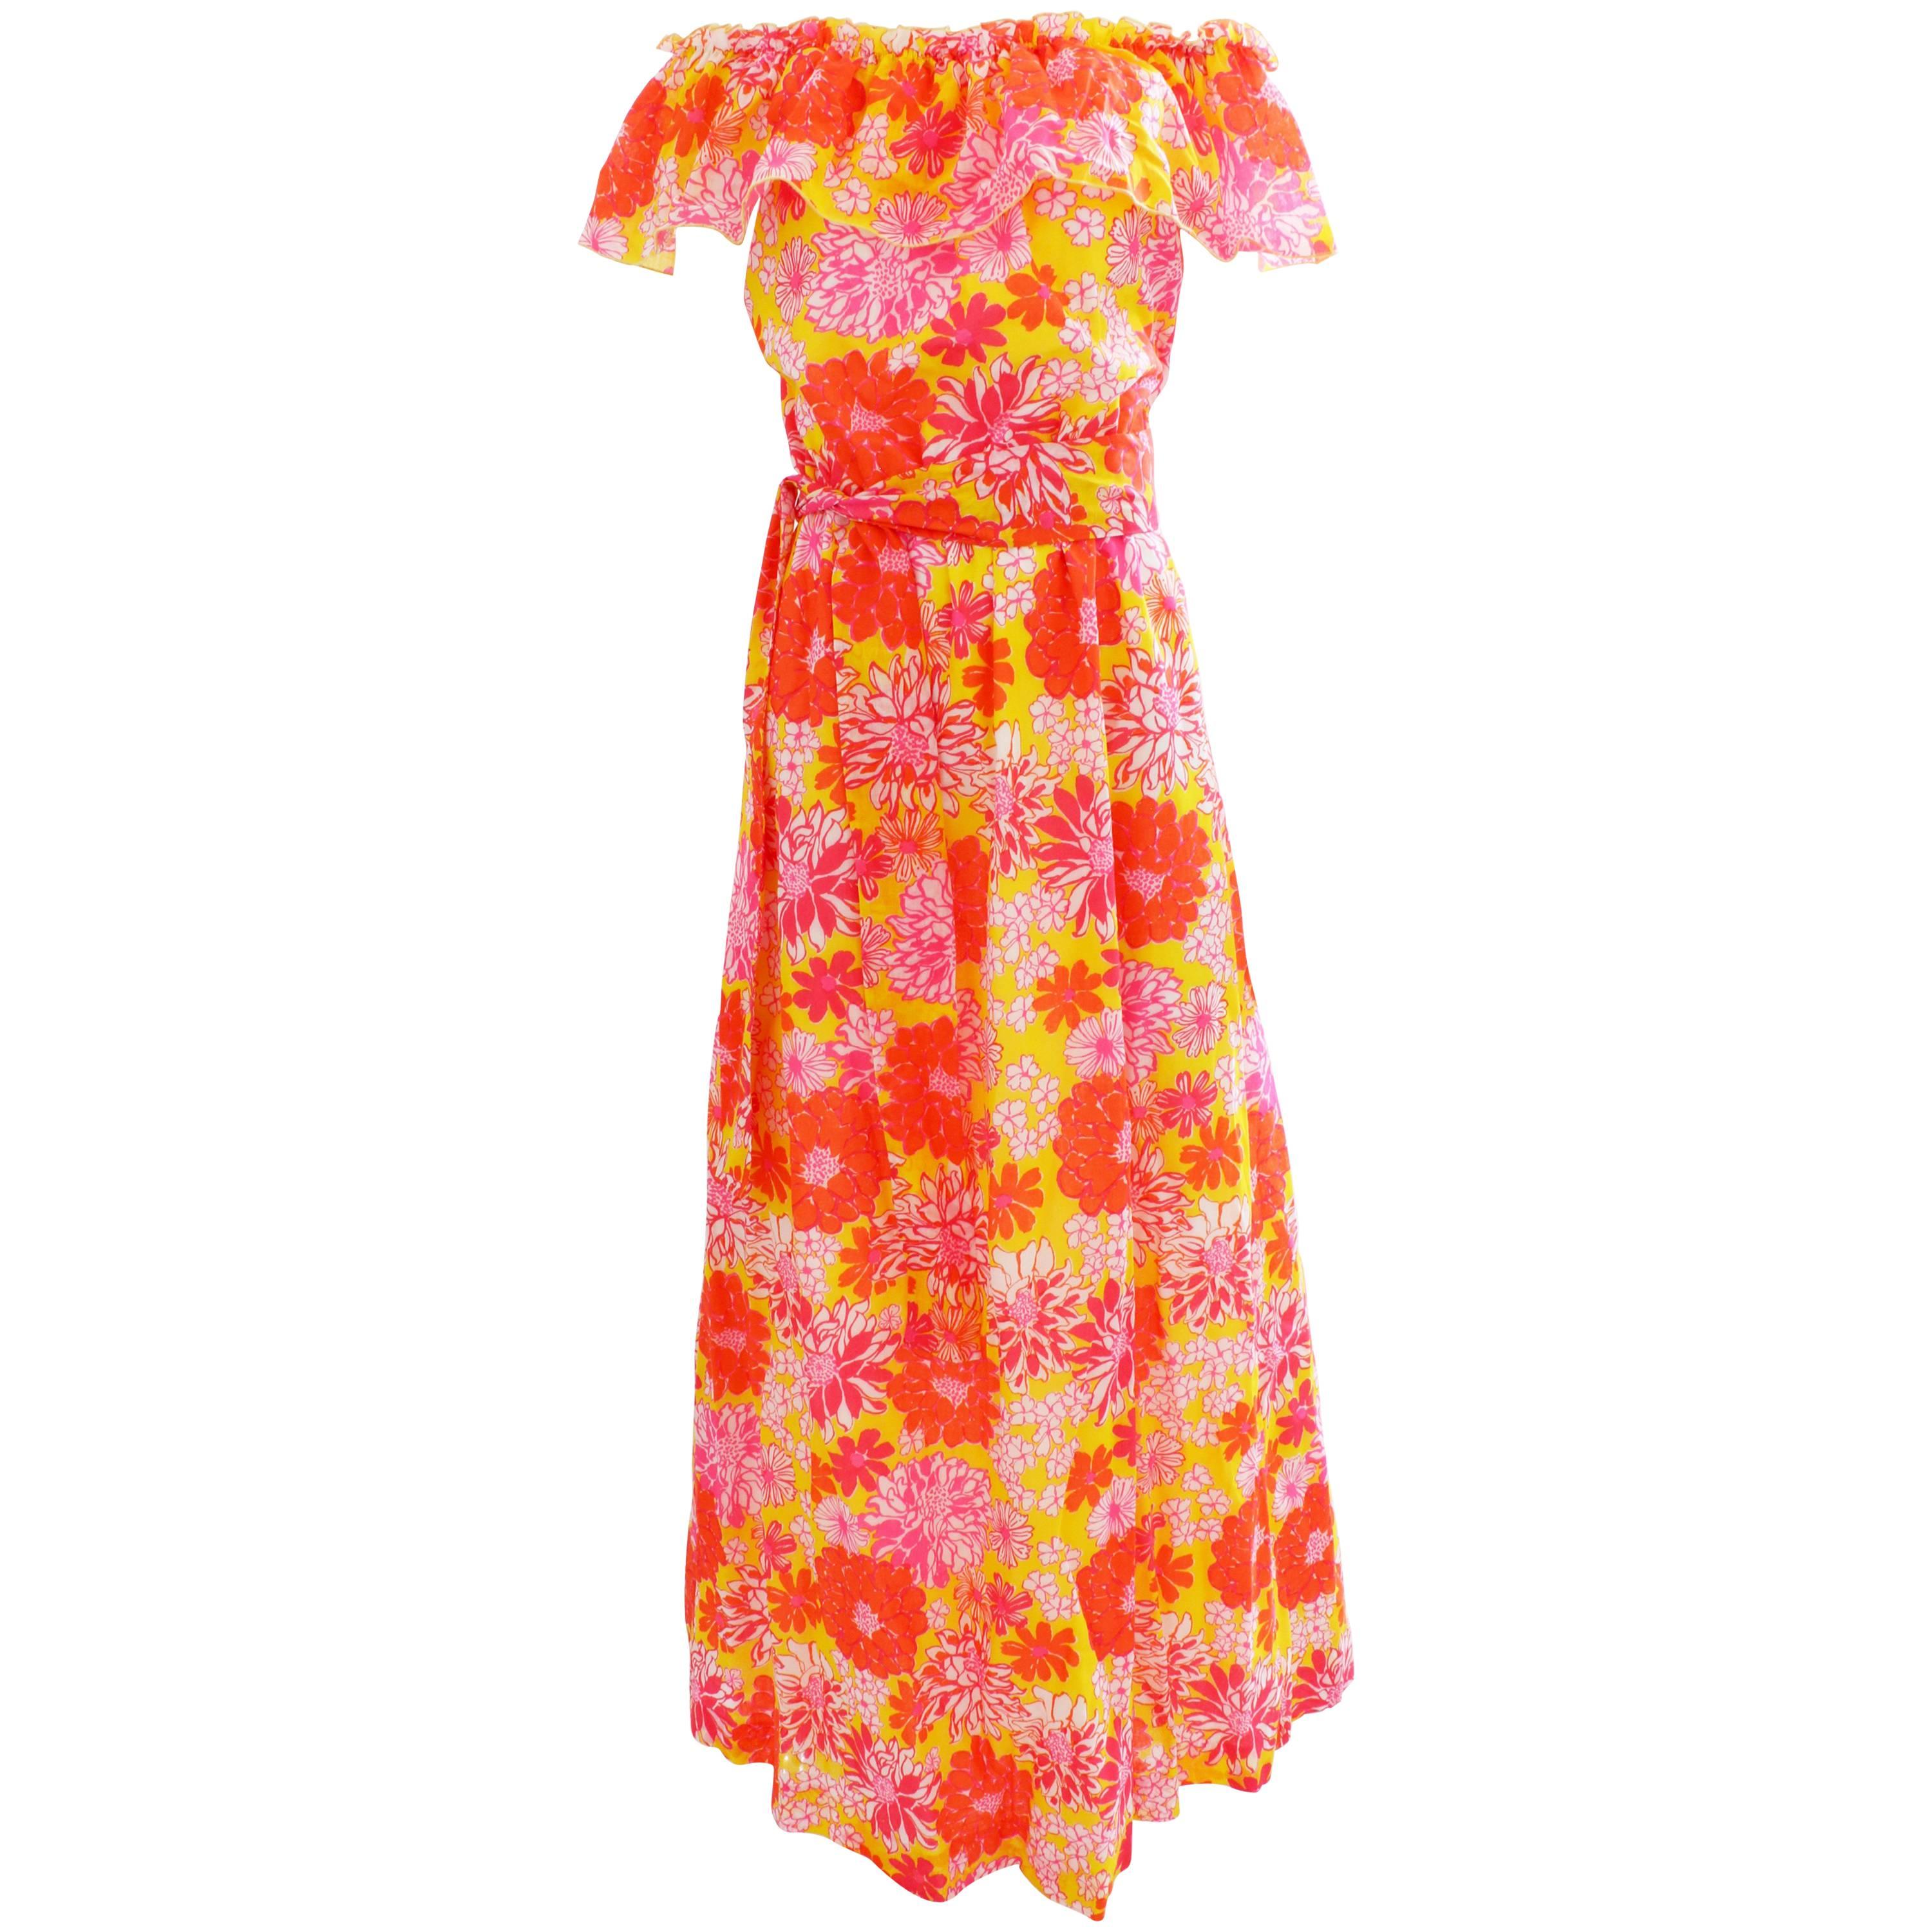 Lilly Pulitzer Floral Maxi Dress with Off Shoulder Ruffle Trim and Sash, 1970s